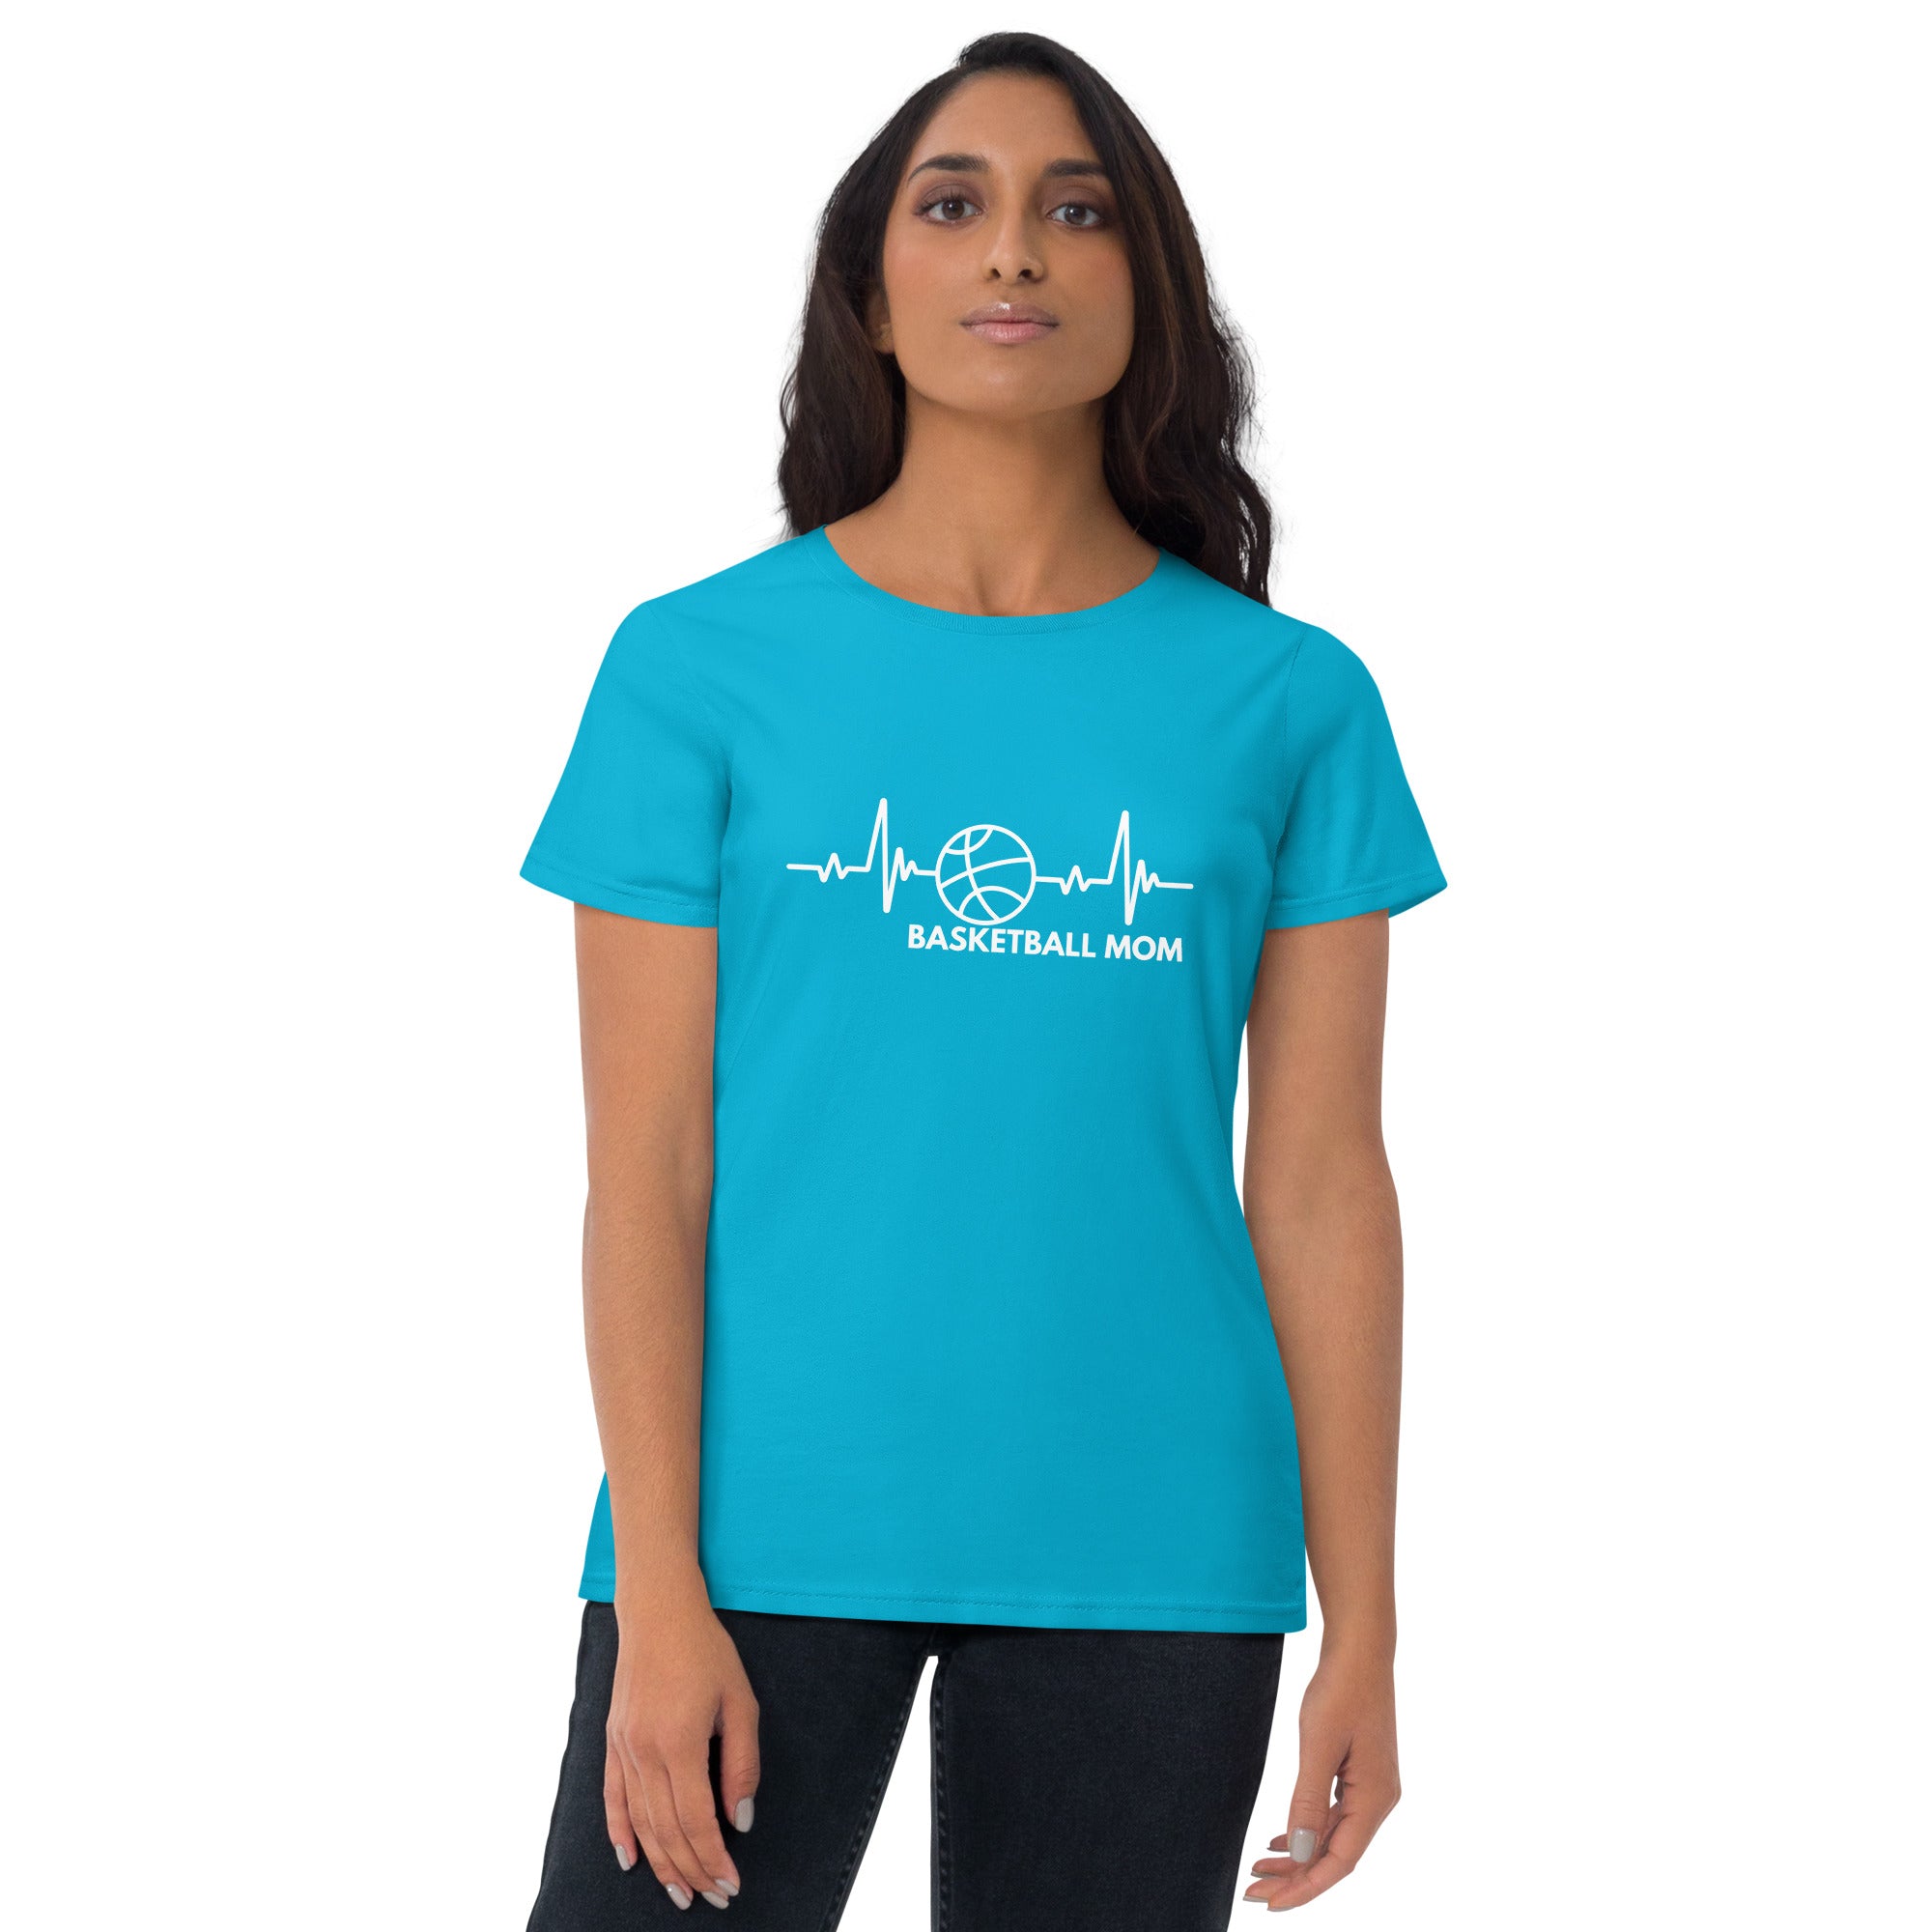 Basketball Mom Women's Fitted T-Shirt